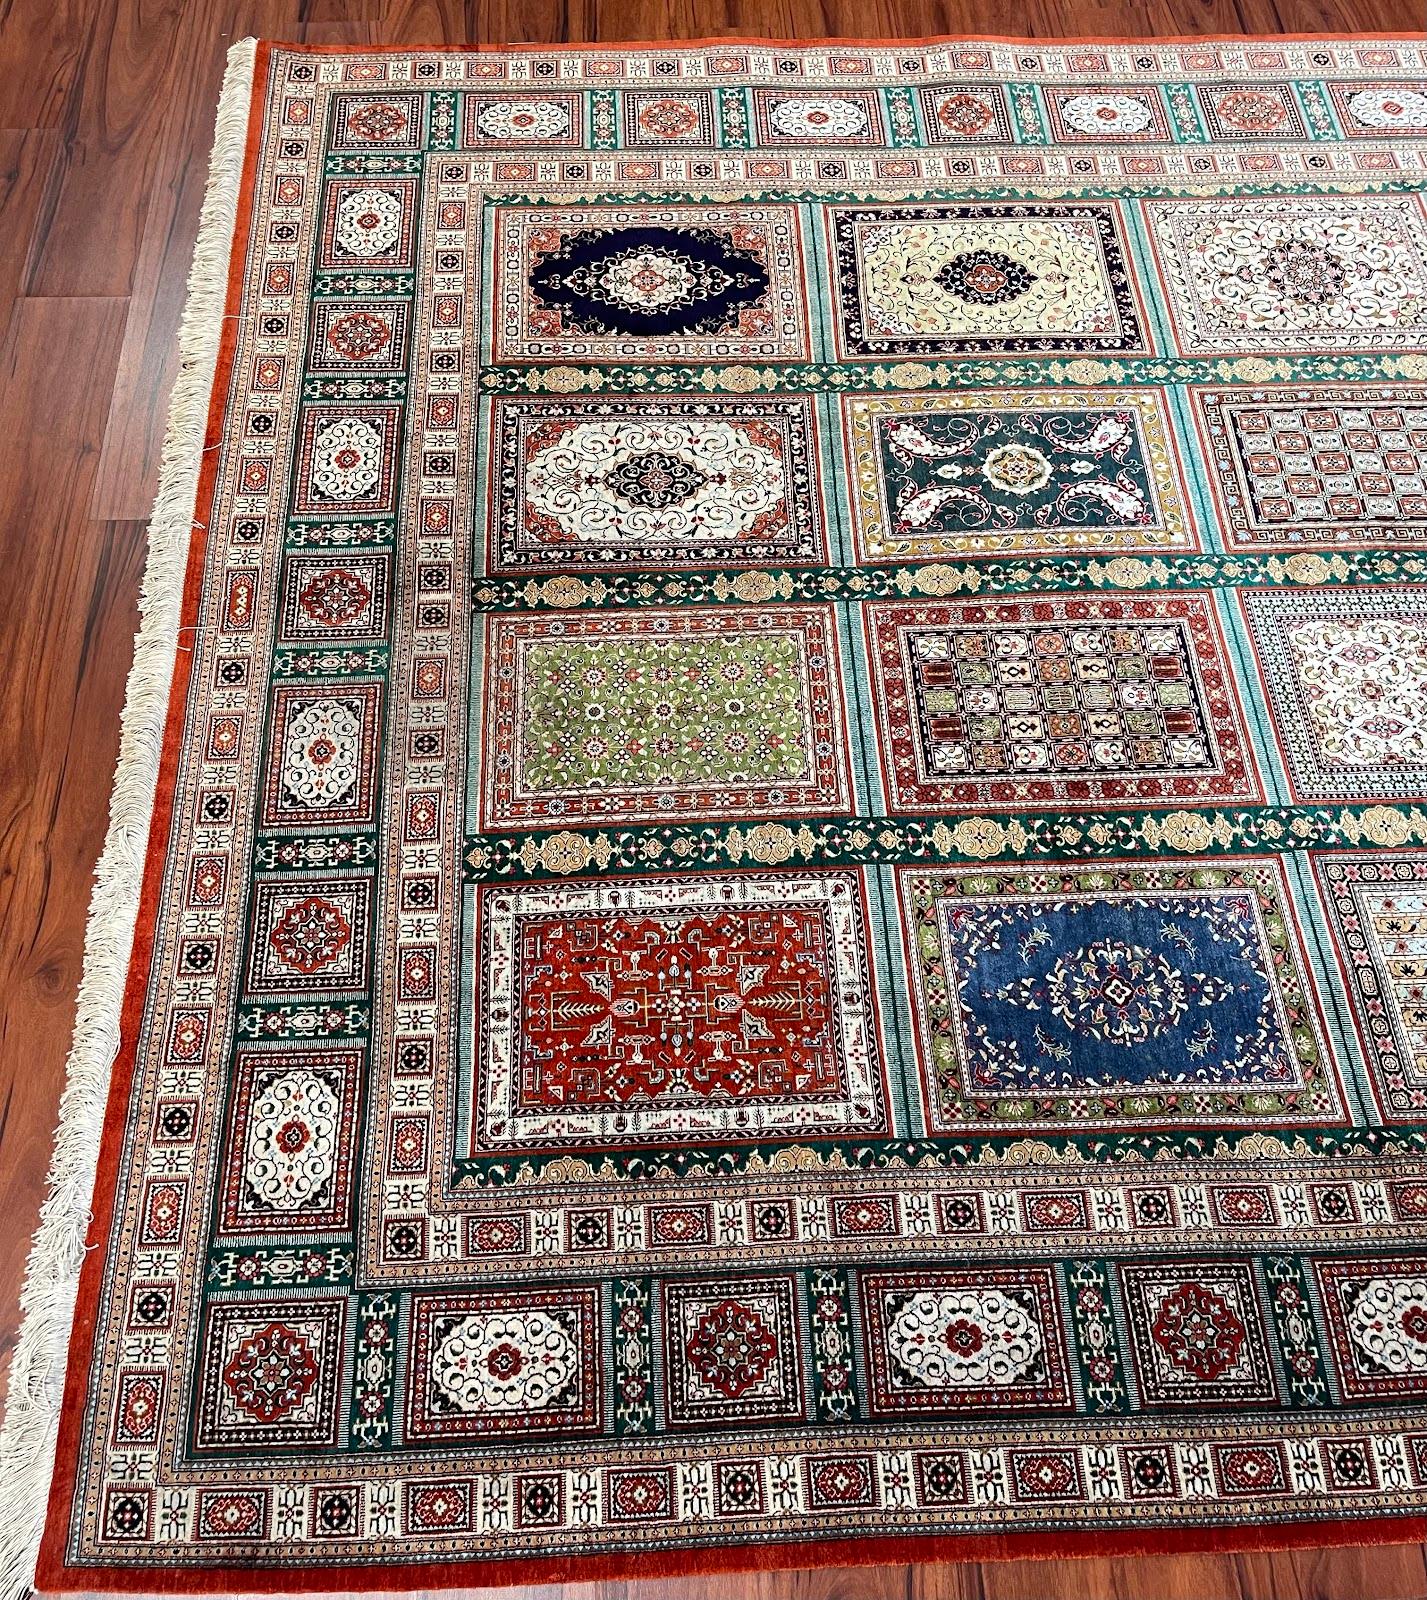 This is a Persian Silk Qum rug originated from iran. The Material is 100% silk. The Dimensions are 6’8”X 9’8” ft. Condition of the item is Excellent. Circa (Date of manufacture) 20th century.